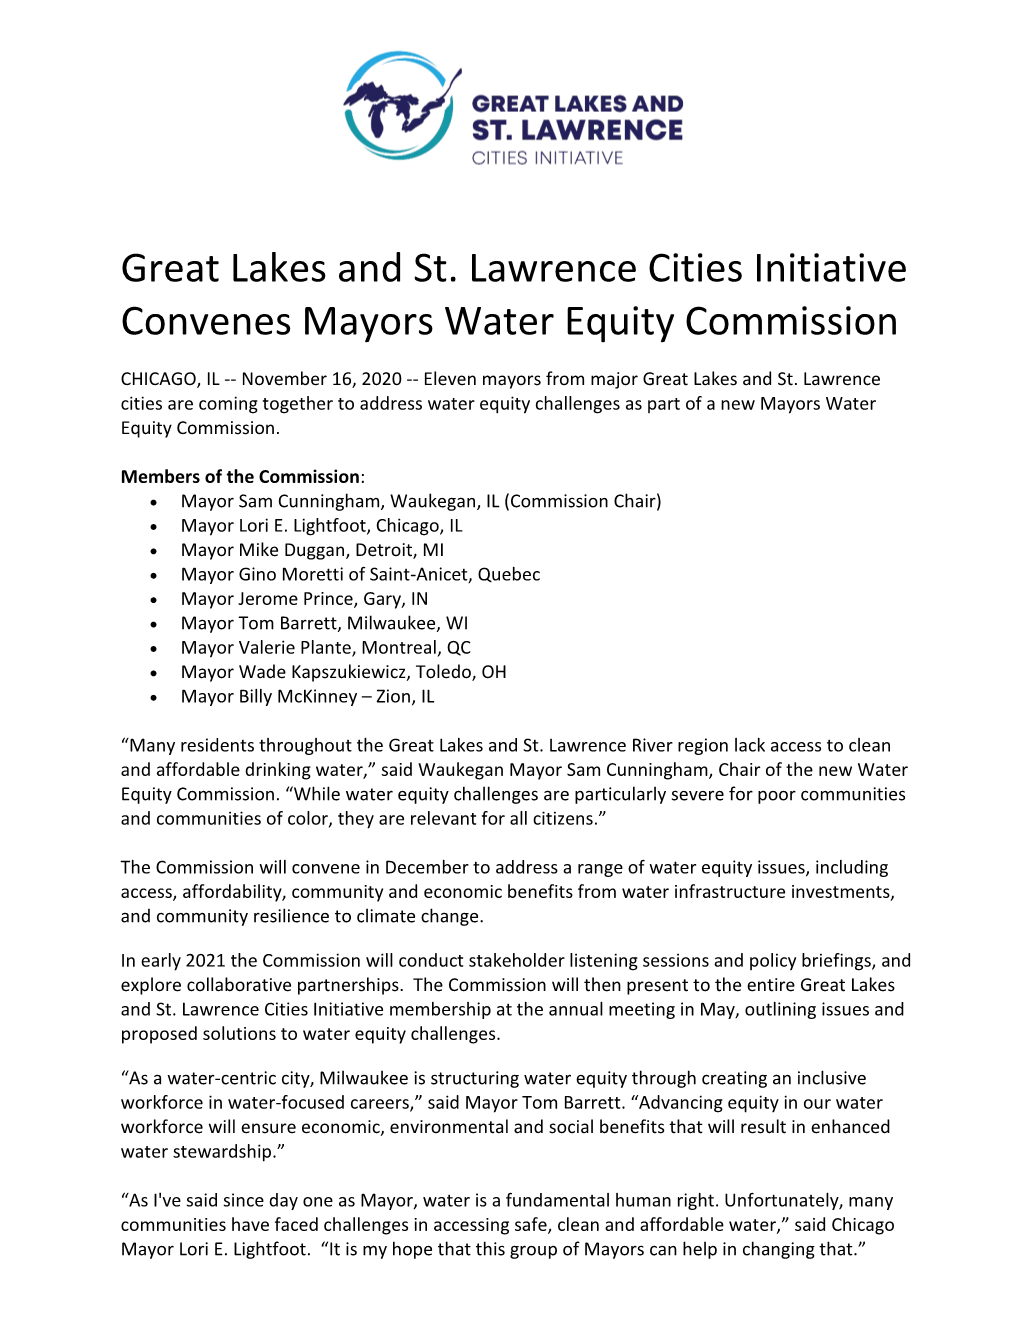 Great Lakes and St. Lawrence Cities Initiative Convenes Mayors Water Equity Commission